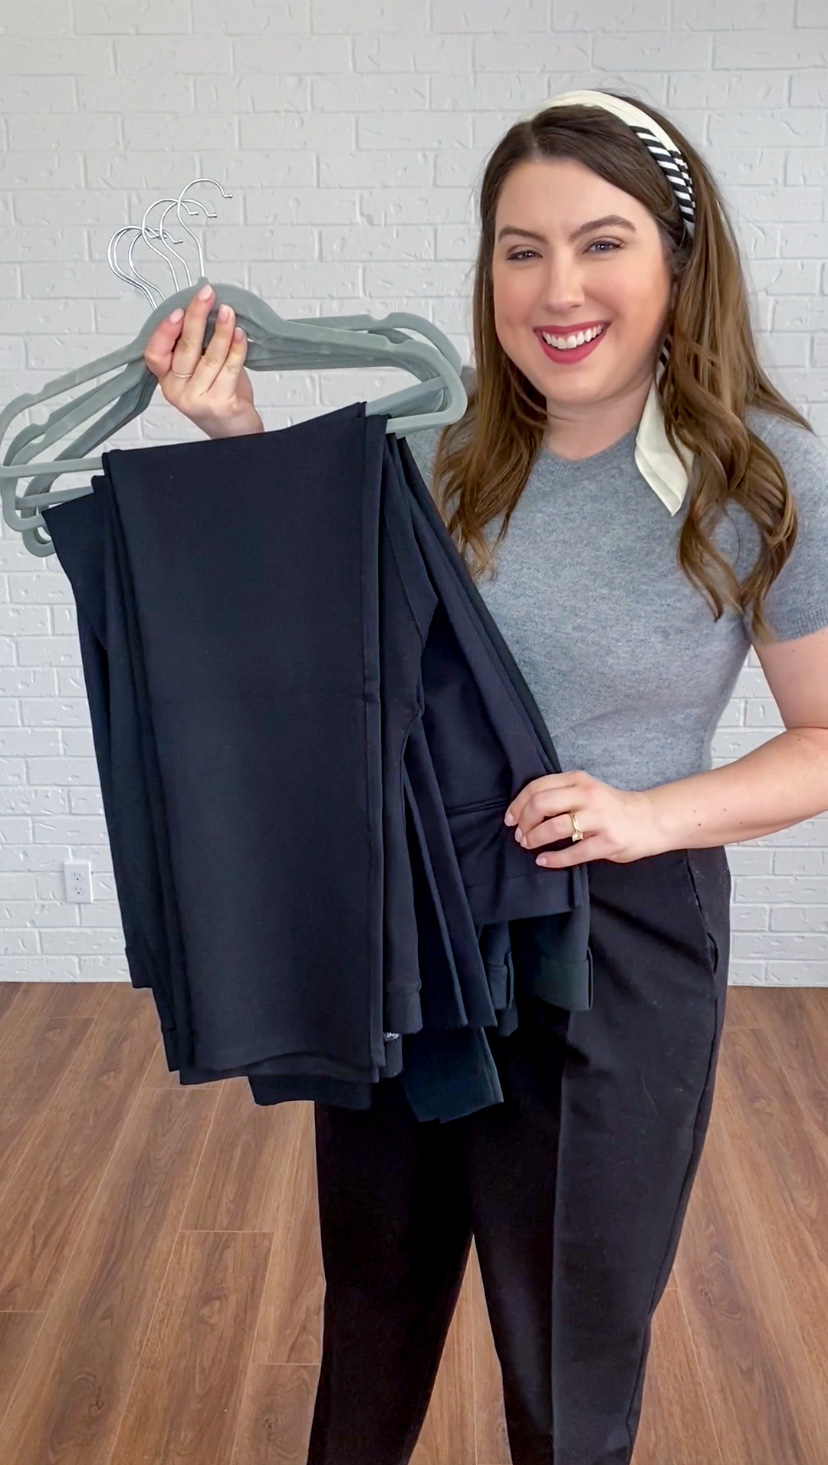 I Tried Quince's Popular Ponte Pants—and They're the Best Work Pants I've  Ever Worn